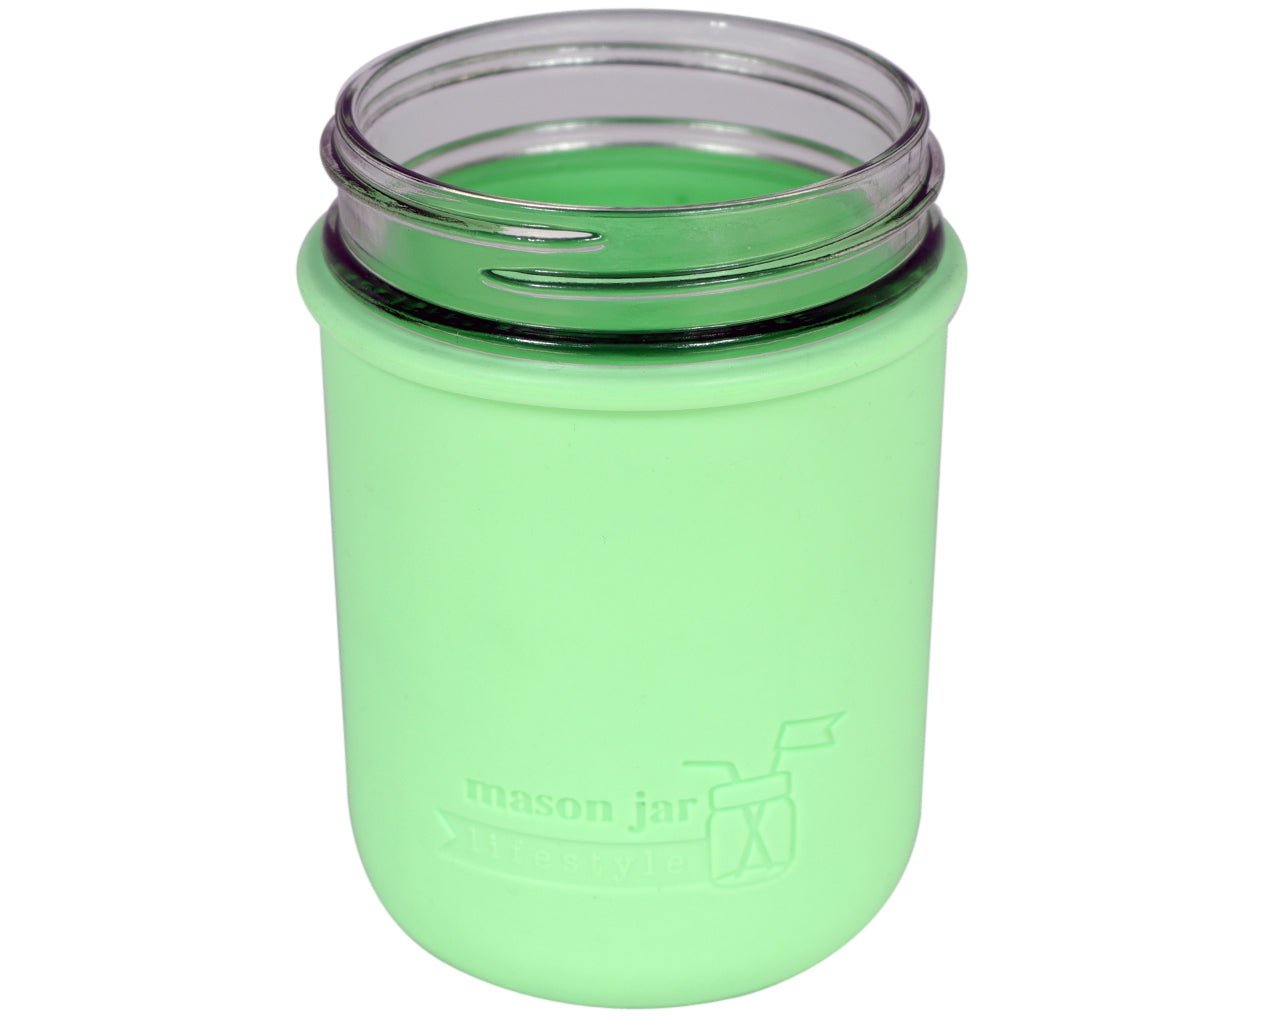 Silicone Sleeve for Wide Mouth Pint 16oz Mason Jars